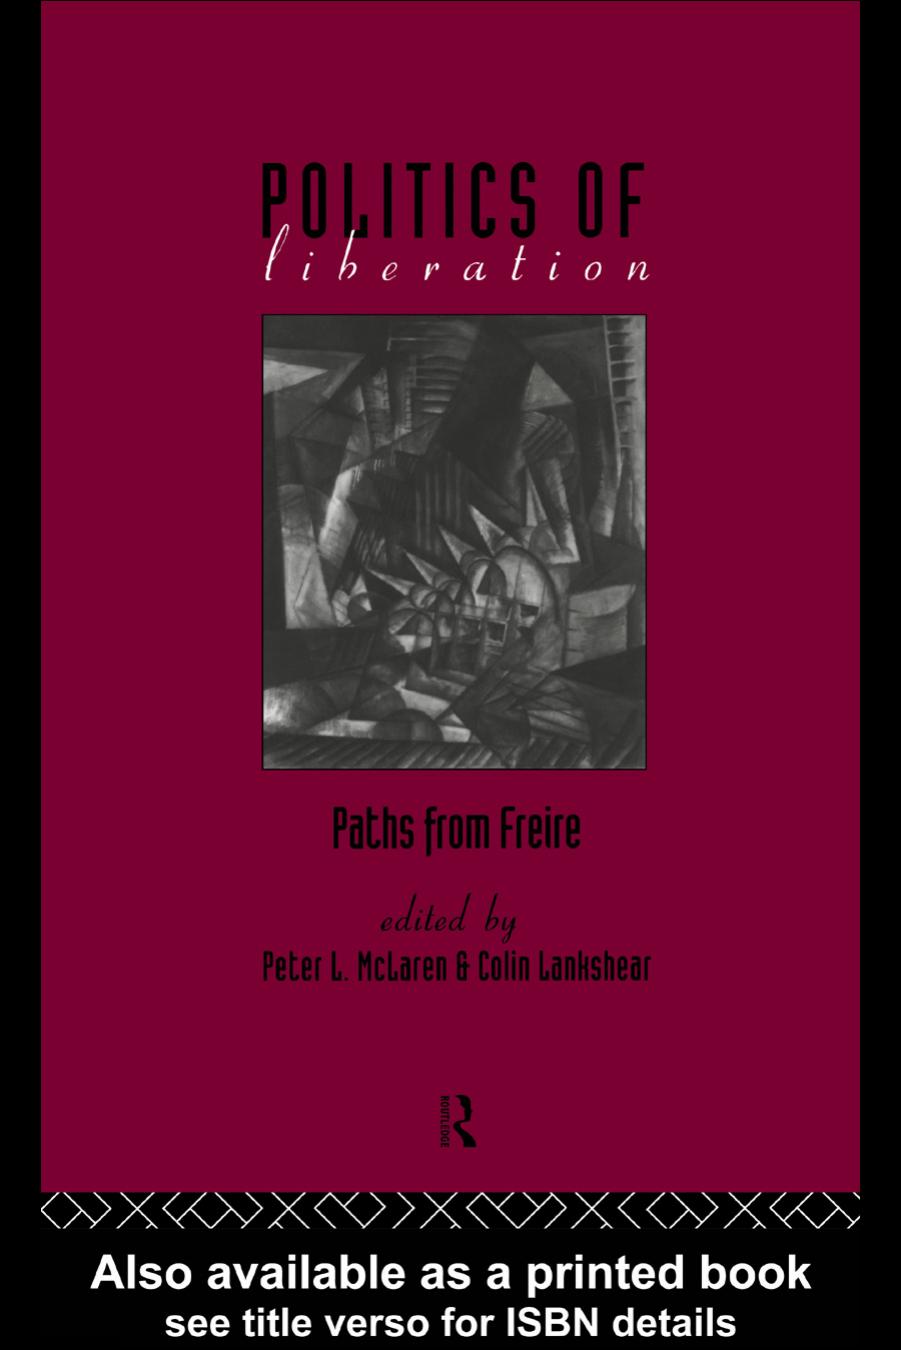 Politics of Liberation: Paths from Freire